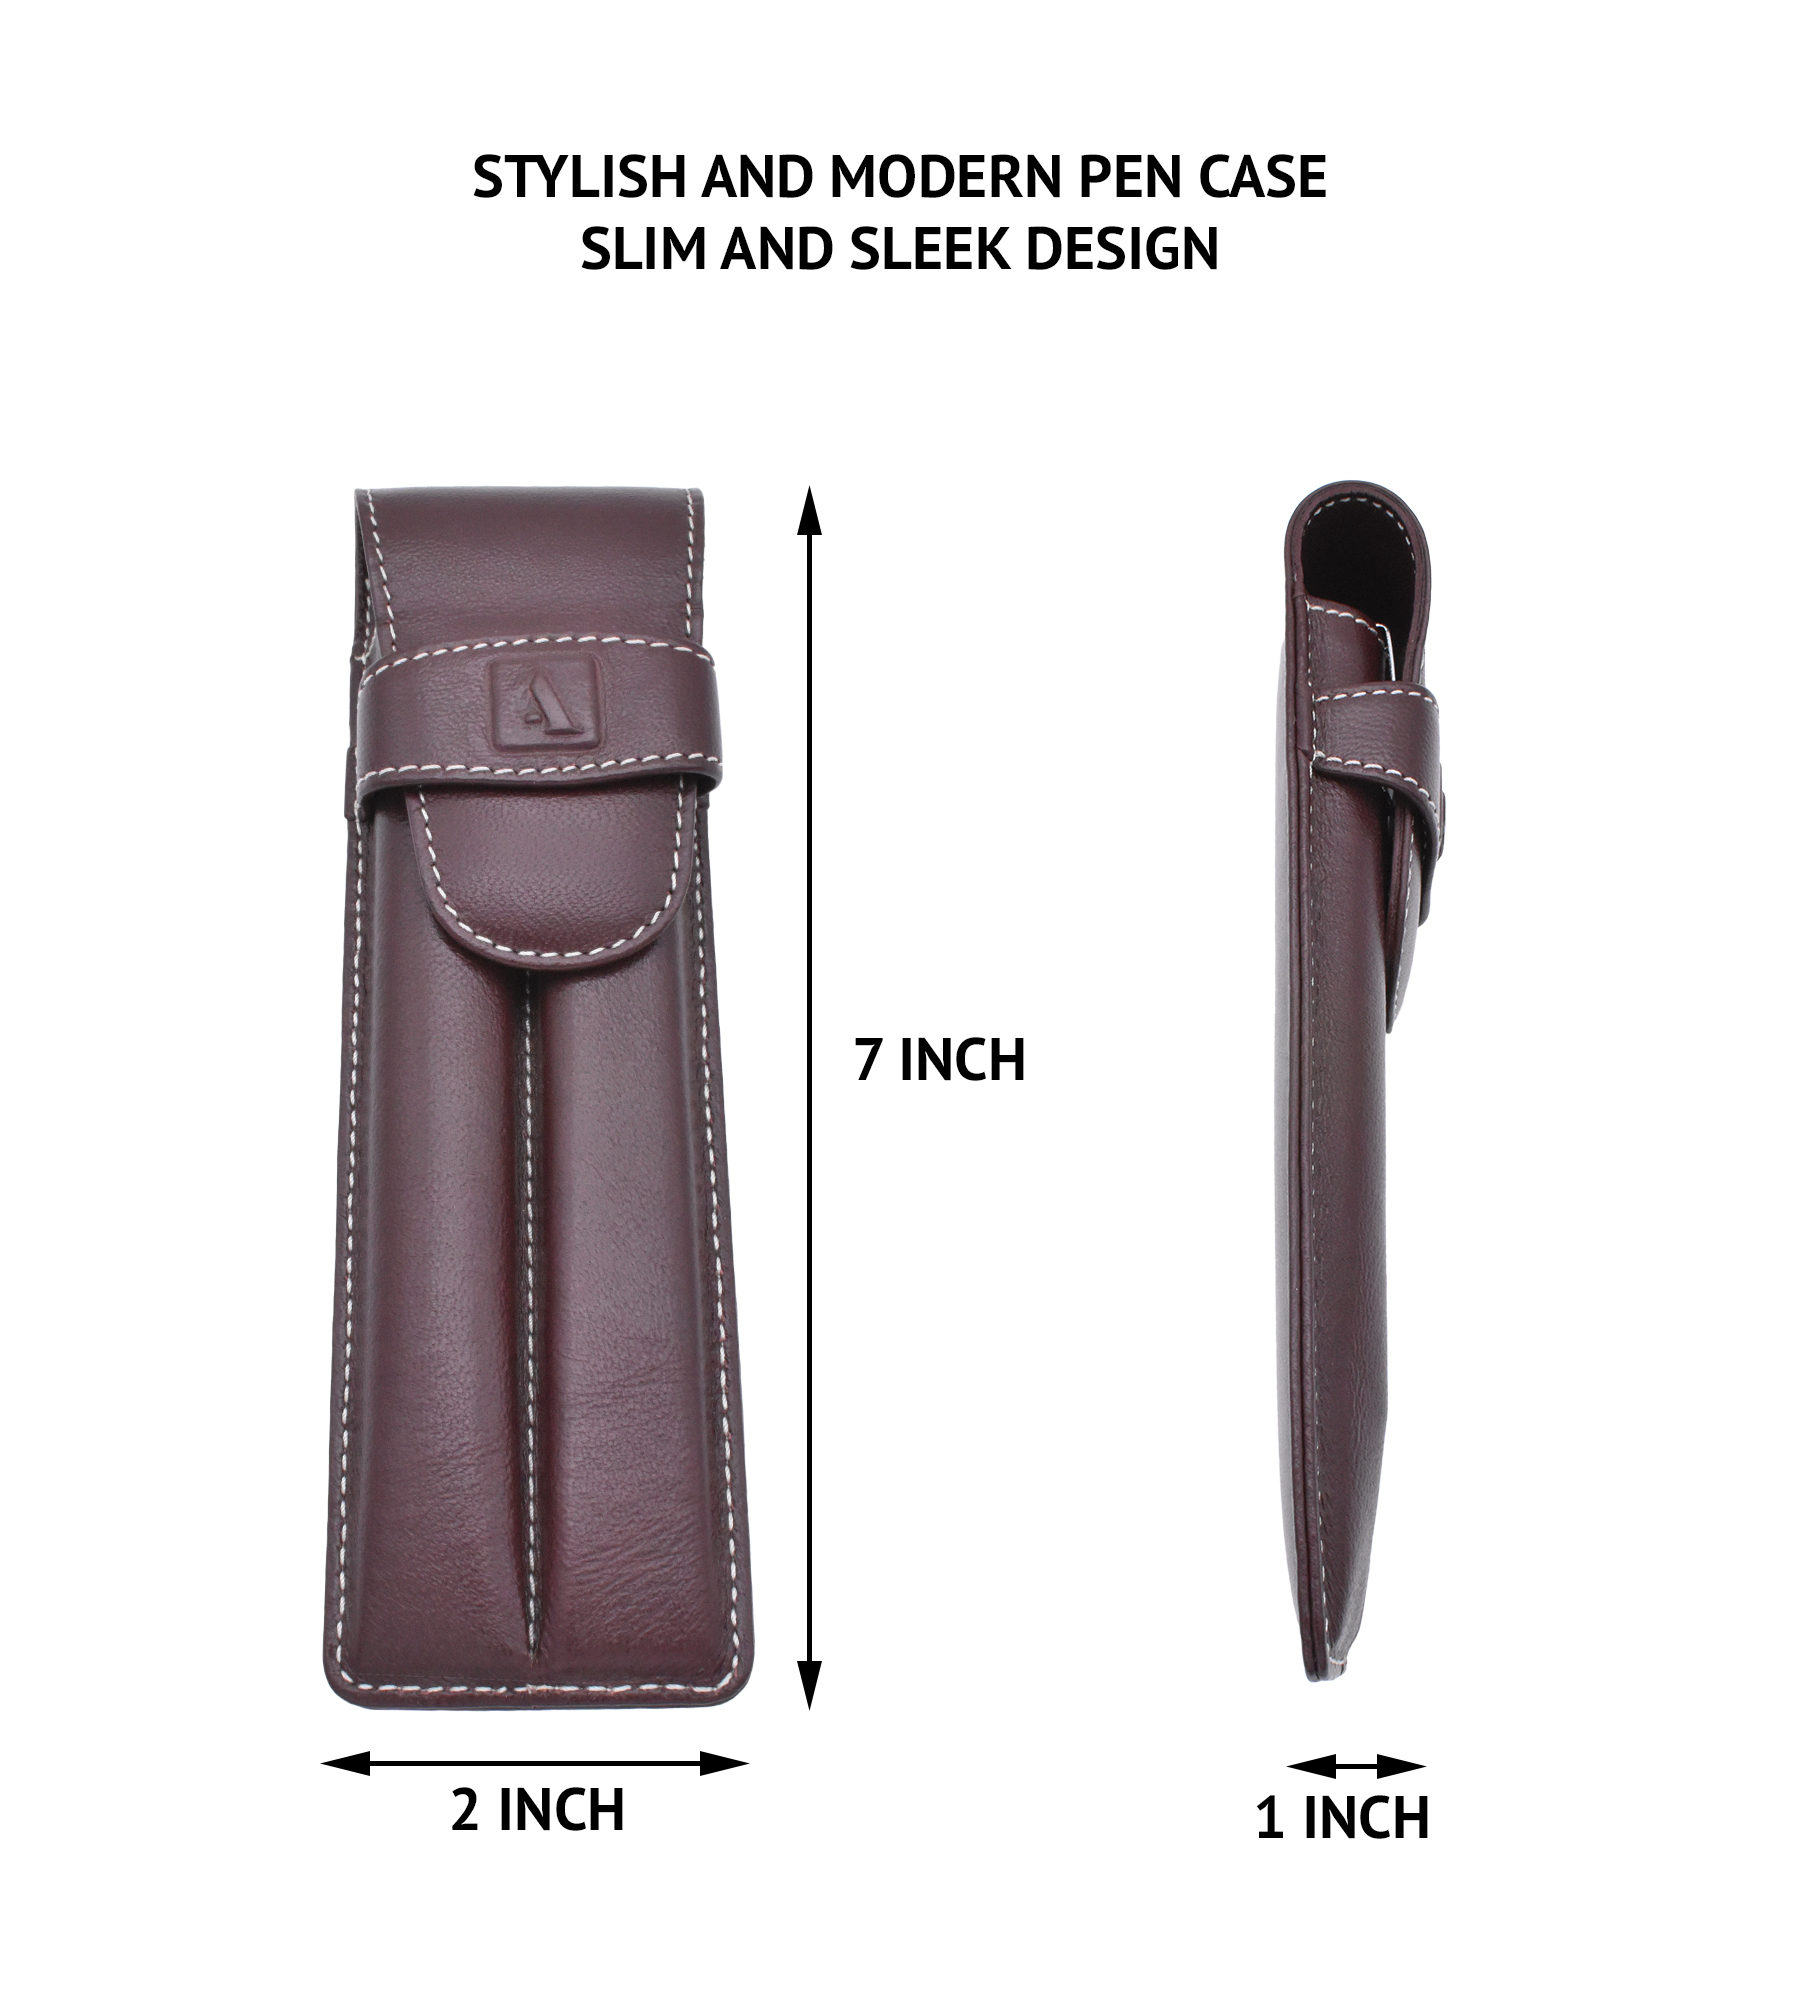 W51--Pen case to carry 2 pens in Genuine Leather - Wine